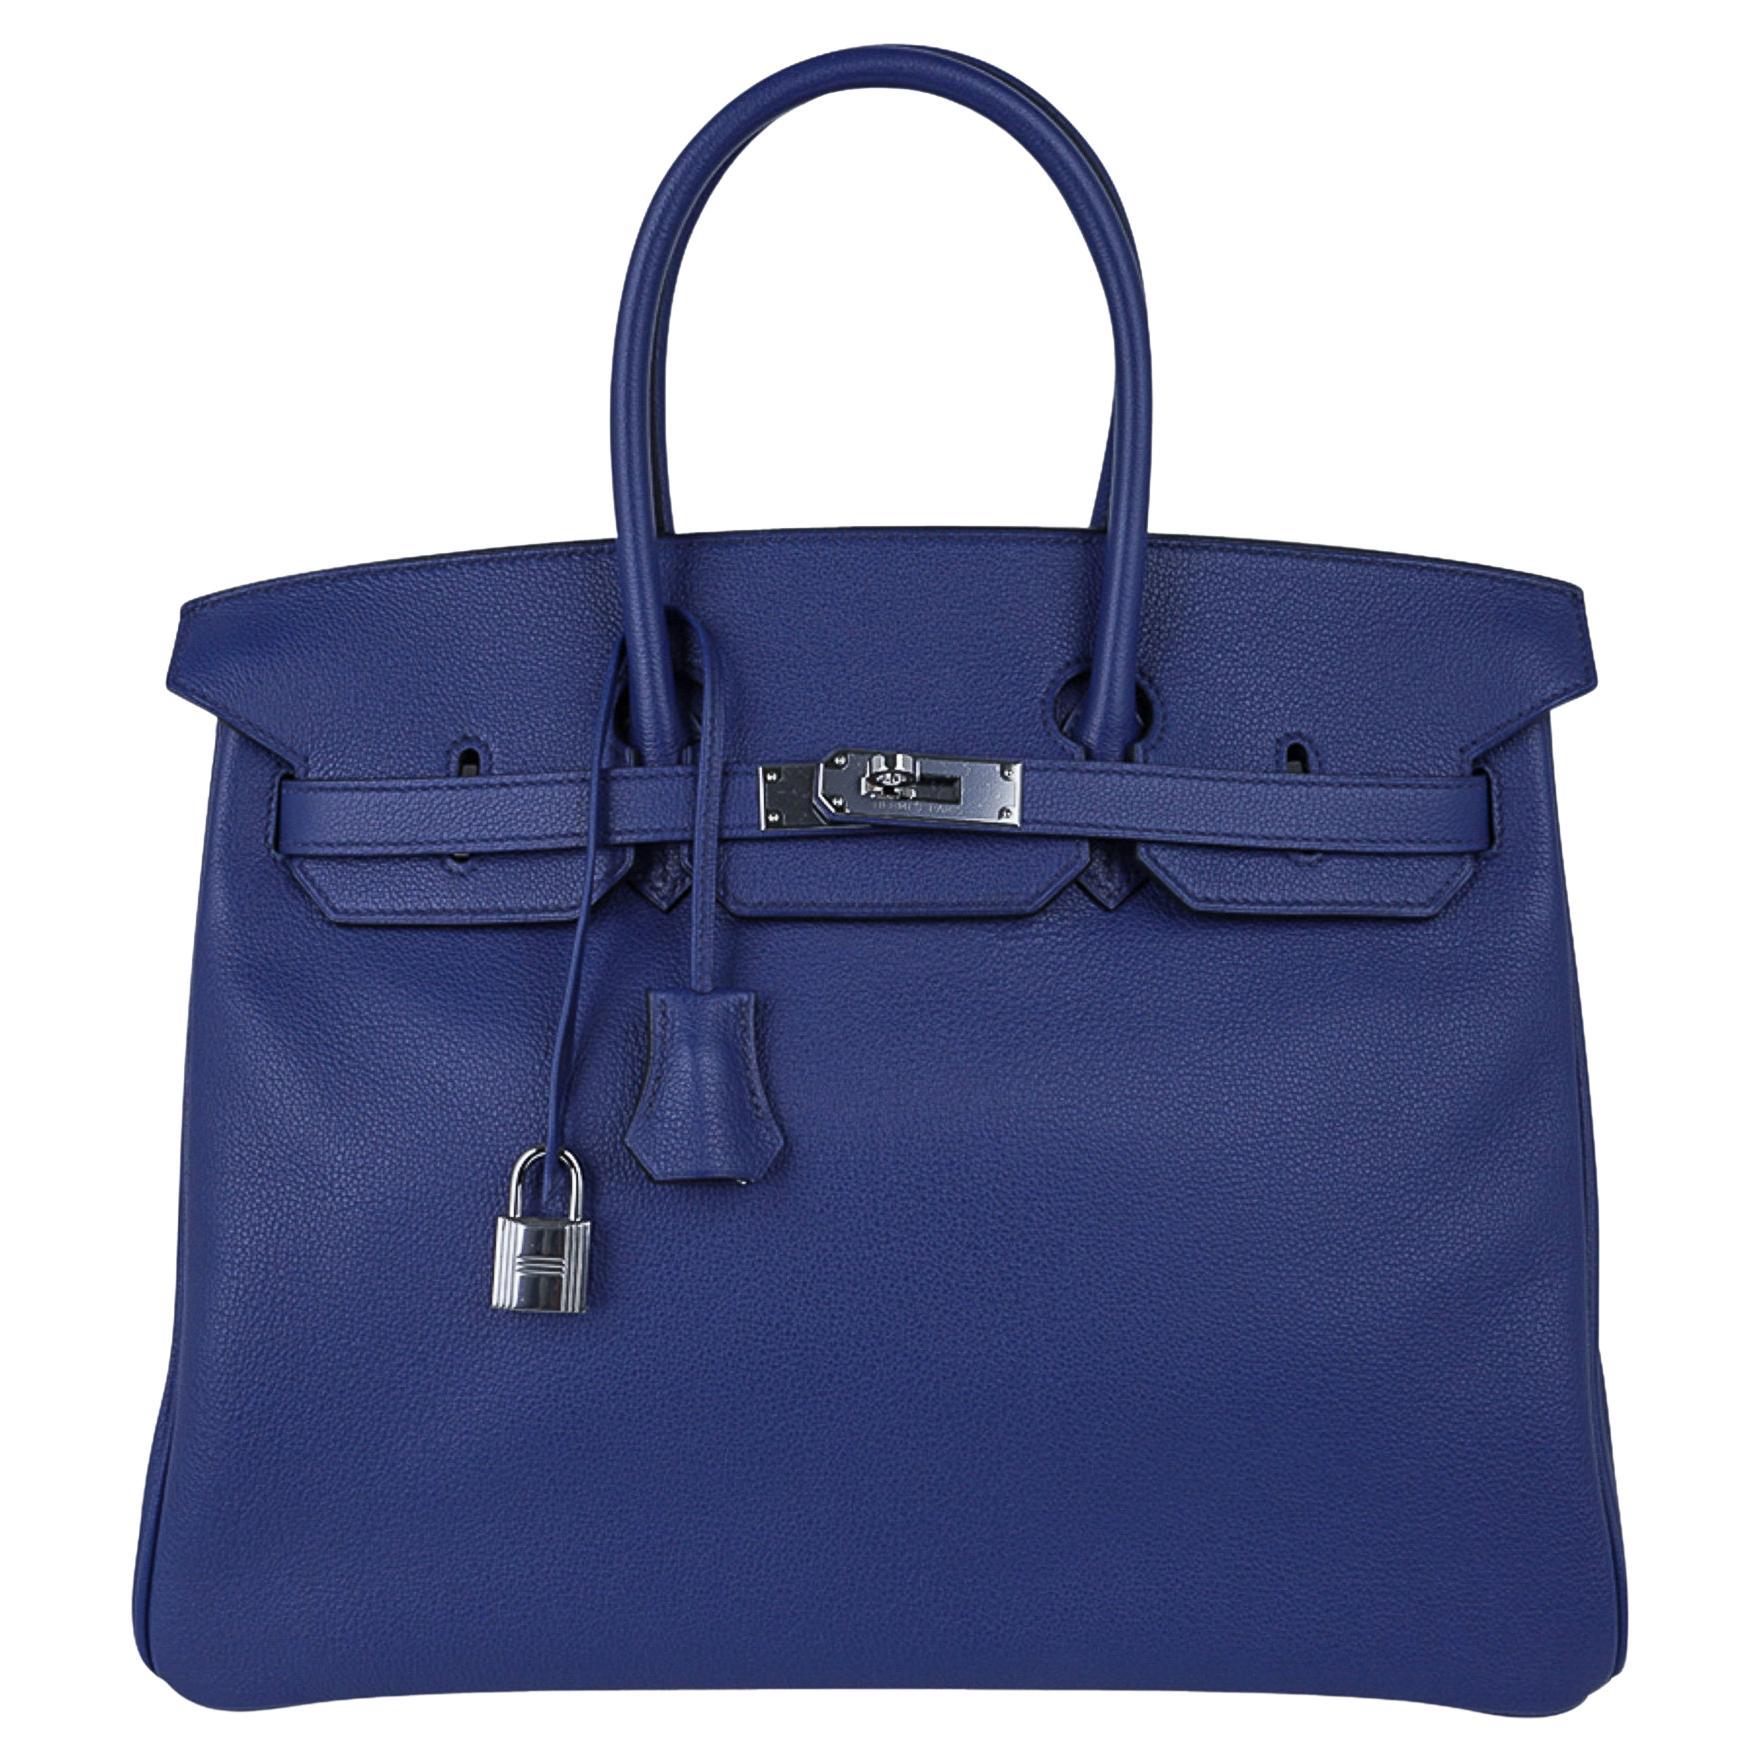 Hermes Birkin 35 Blue Sapphire Limited Edition Toile Printed Sea Surf Bag For Sale